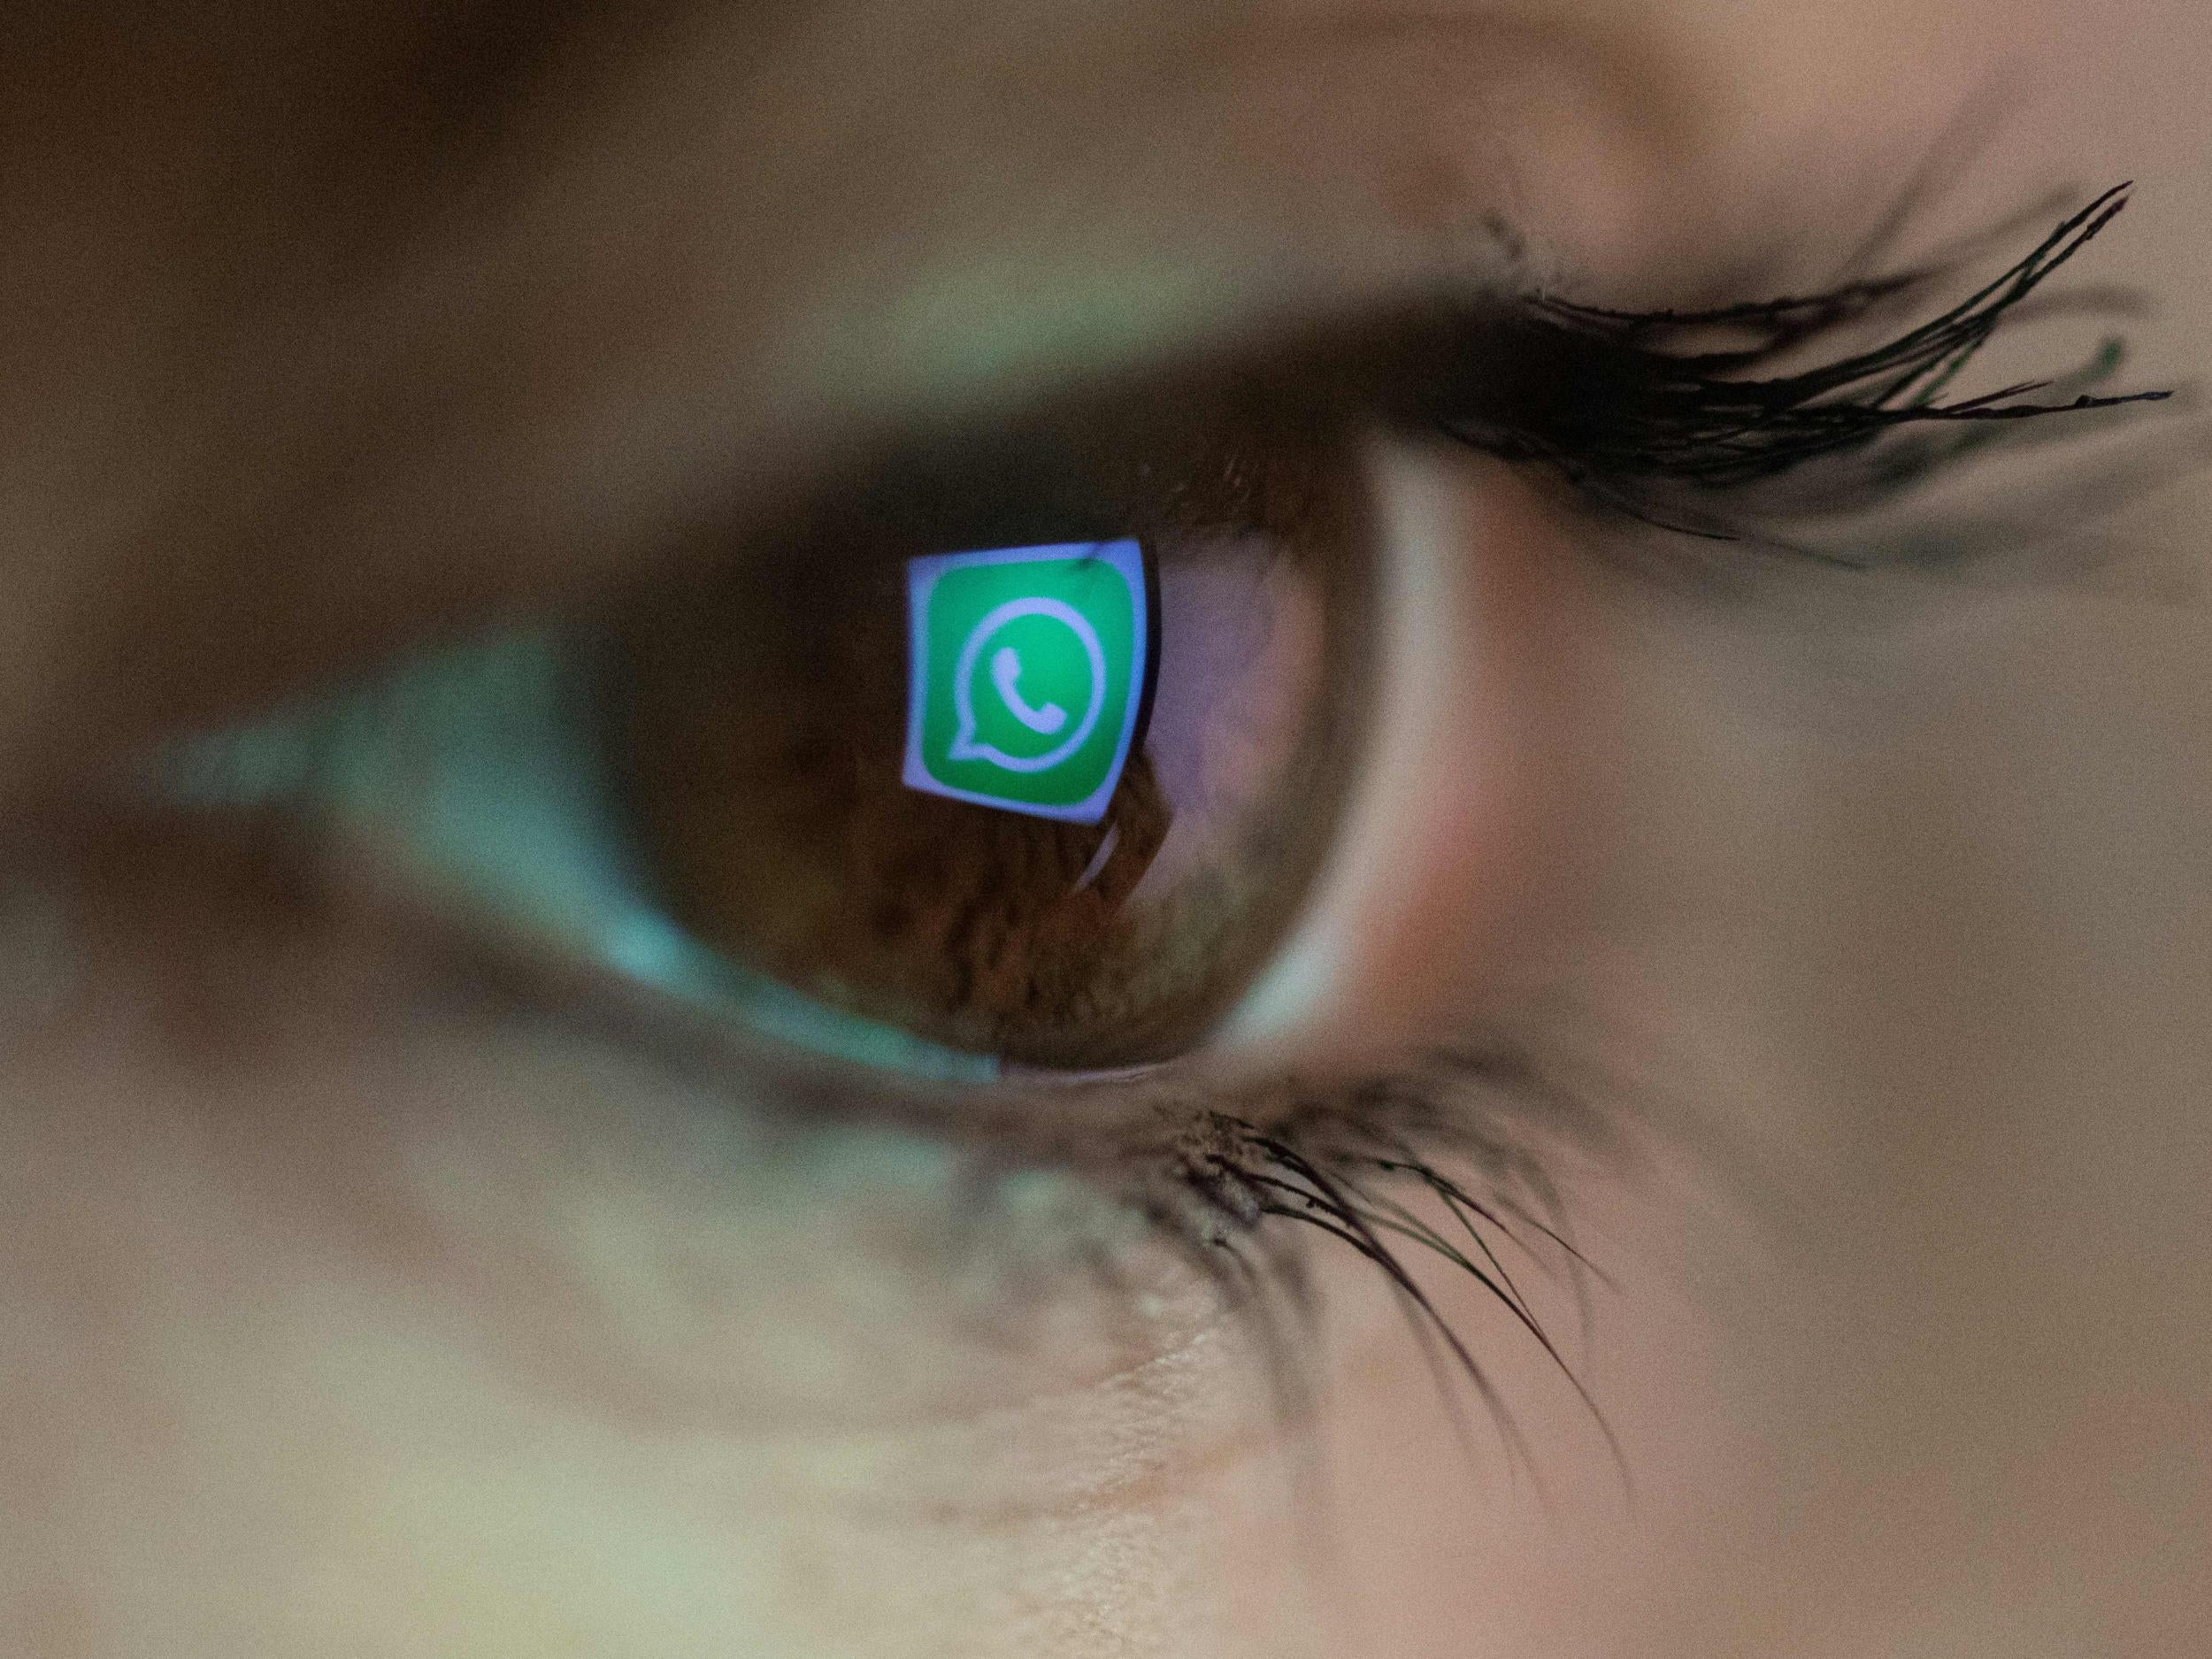 Chalid Sex - WhatsApp is hotbed for child sex abuse videos in India, study ...